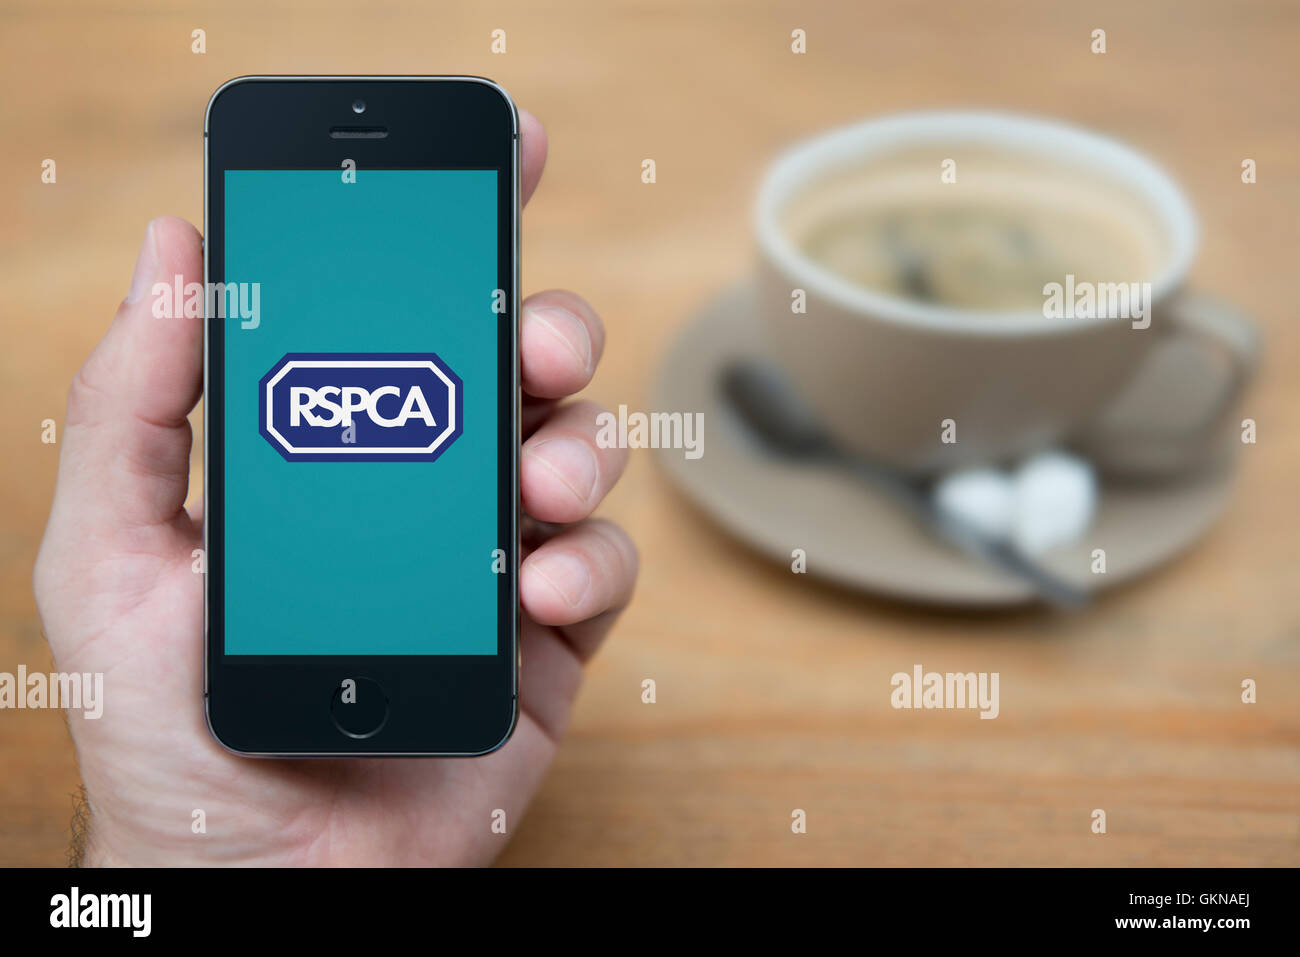 A man looks at his iPhone which displays the RSPCA logo, while sat with a cup of coffee (Editorial use only). Stock Photo